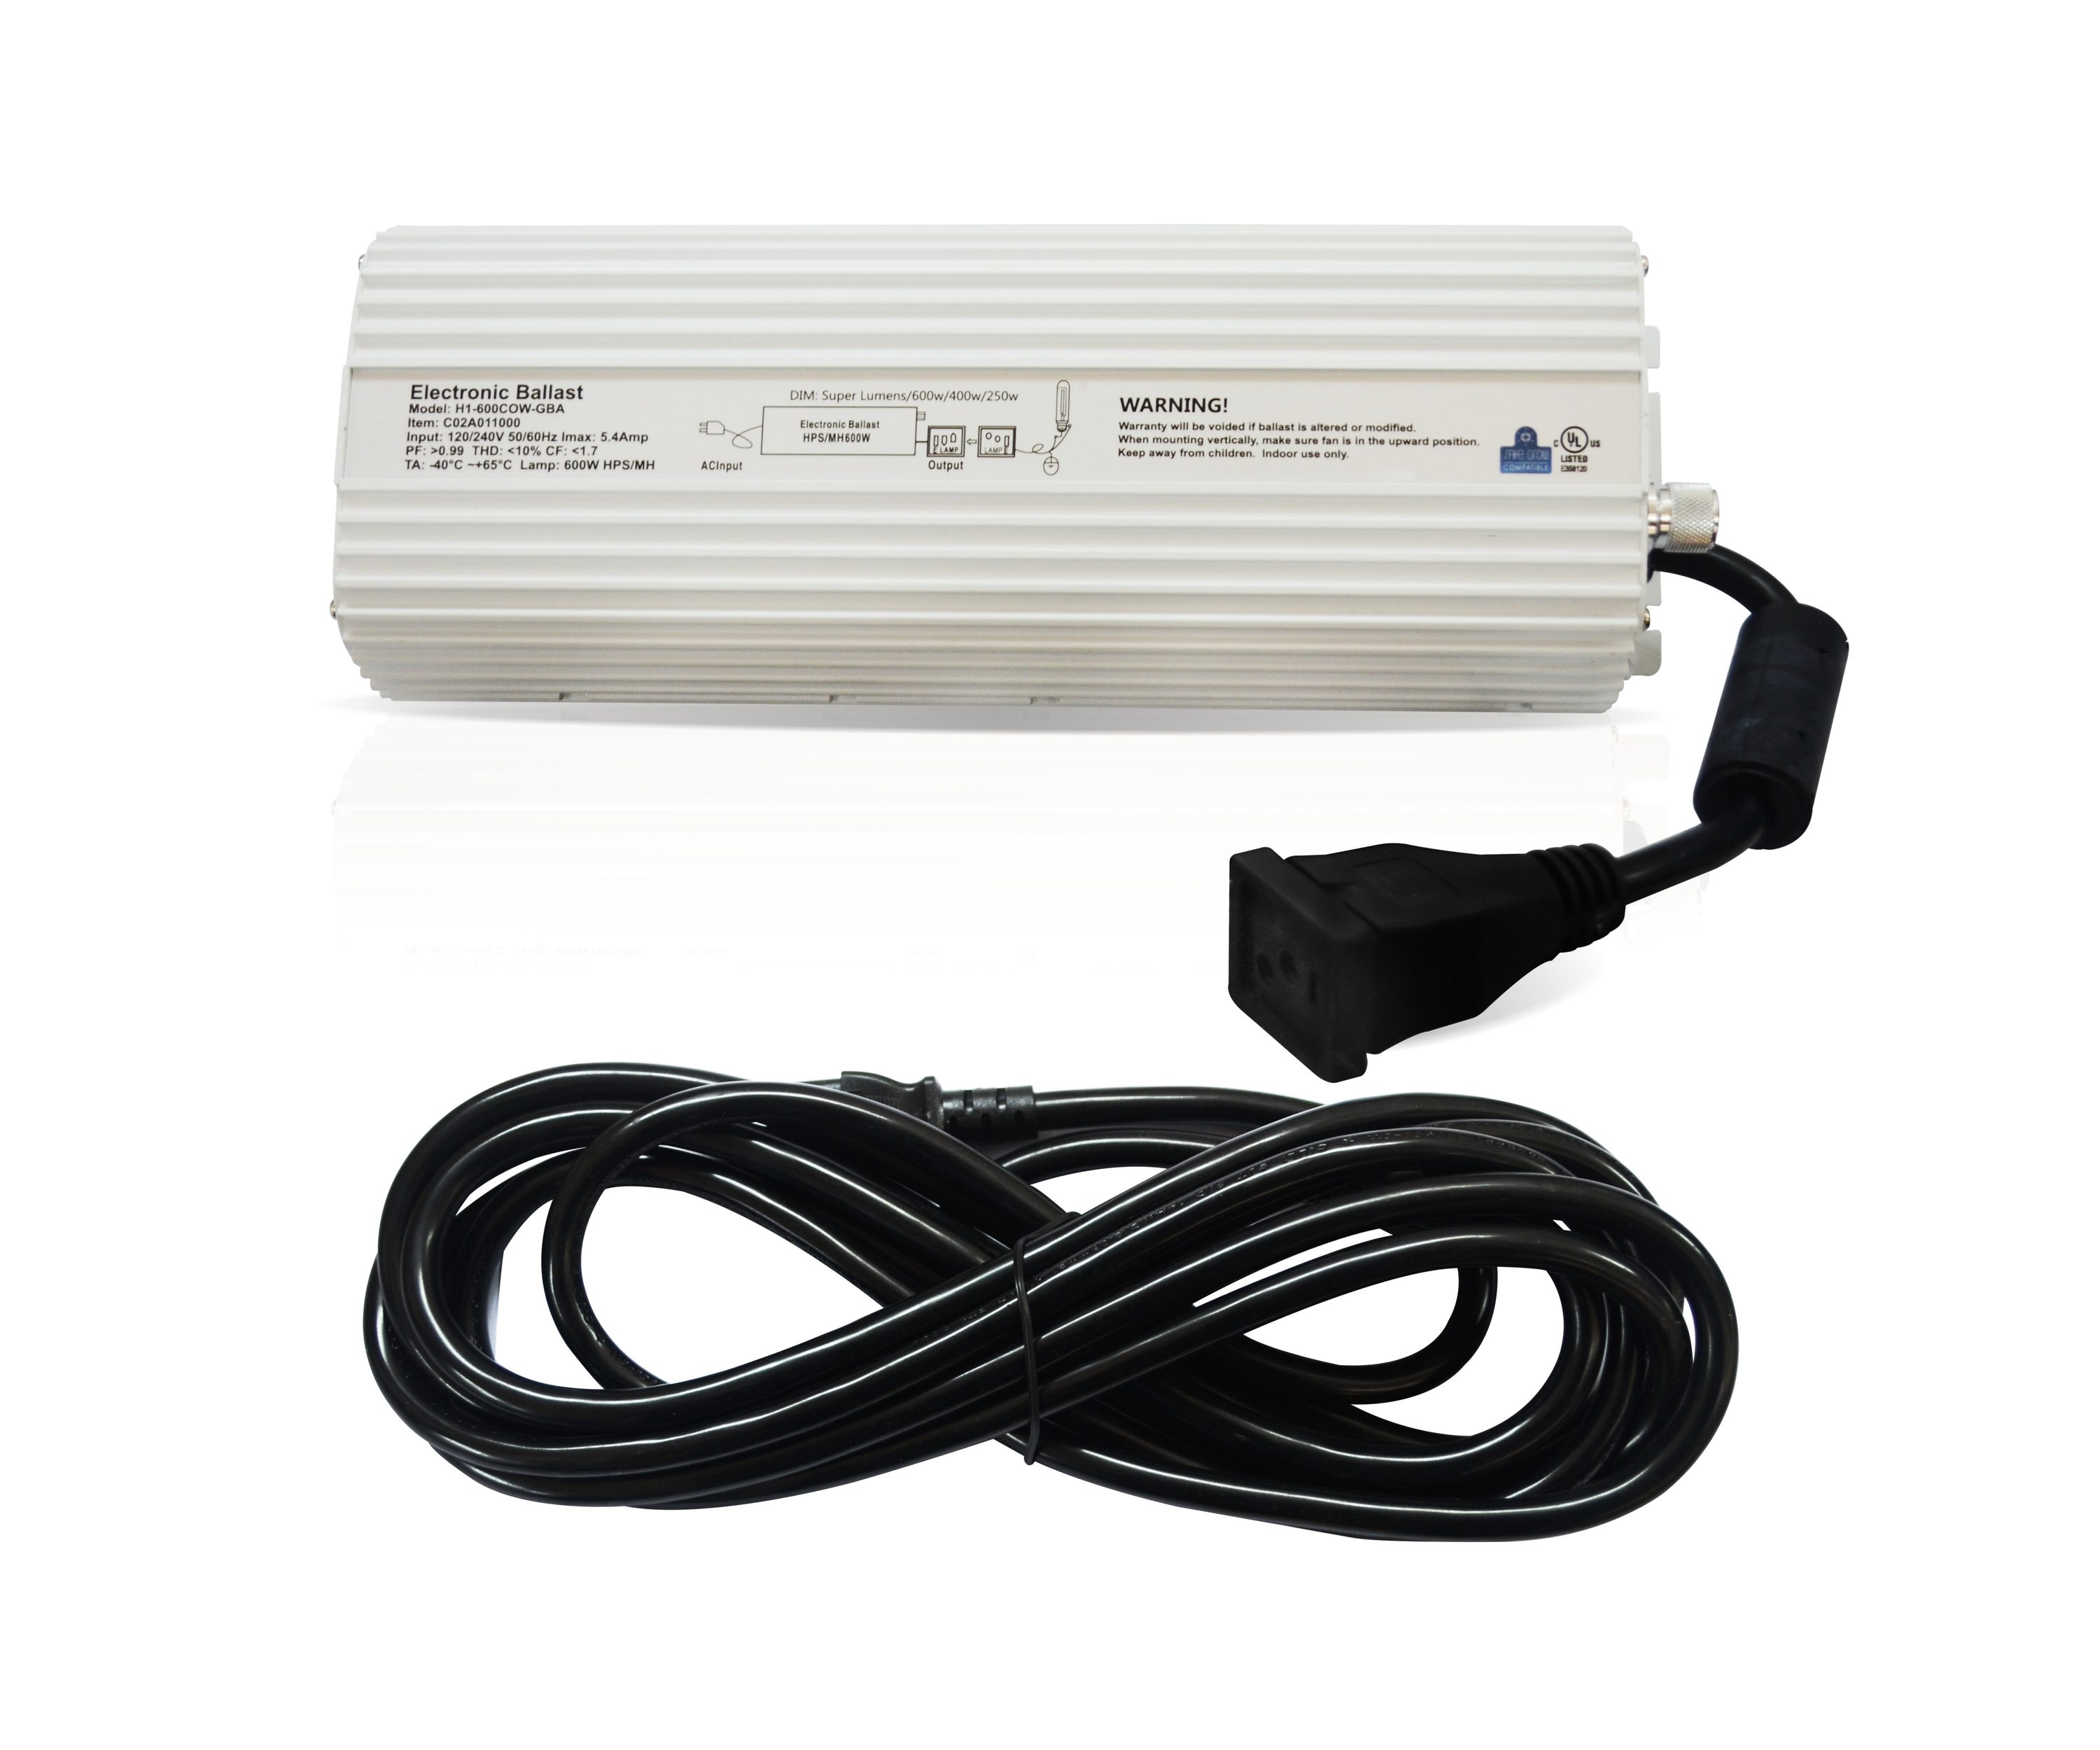 Parlux 250W/400W/600W/660W Boost Digital Dimmable/Variable Ballast New In Box 